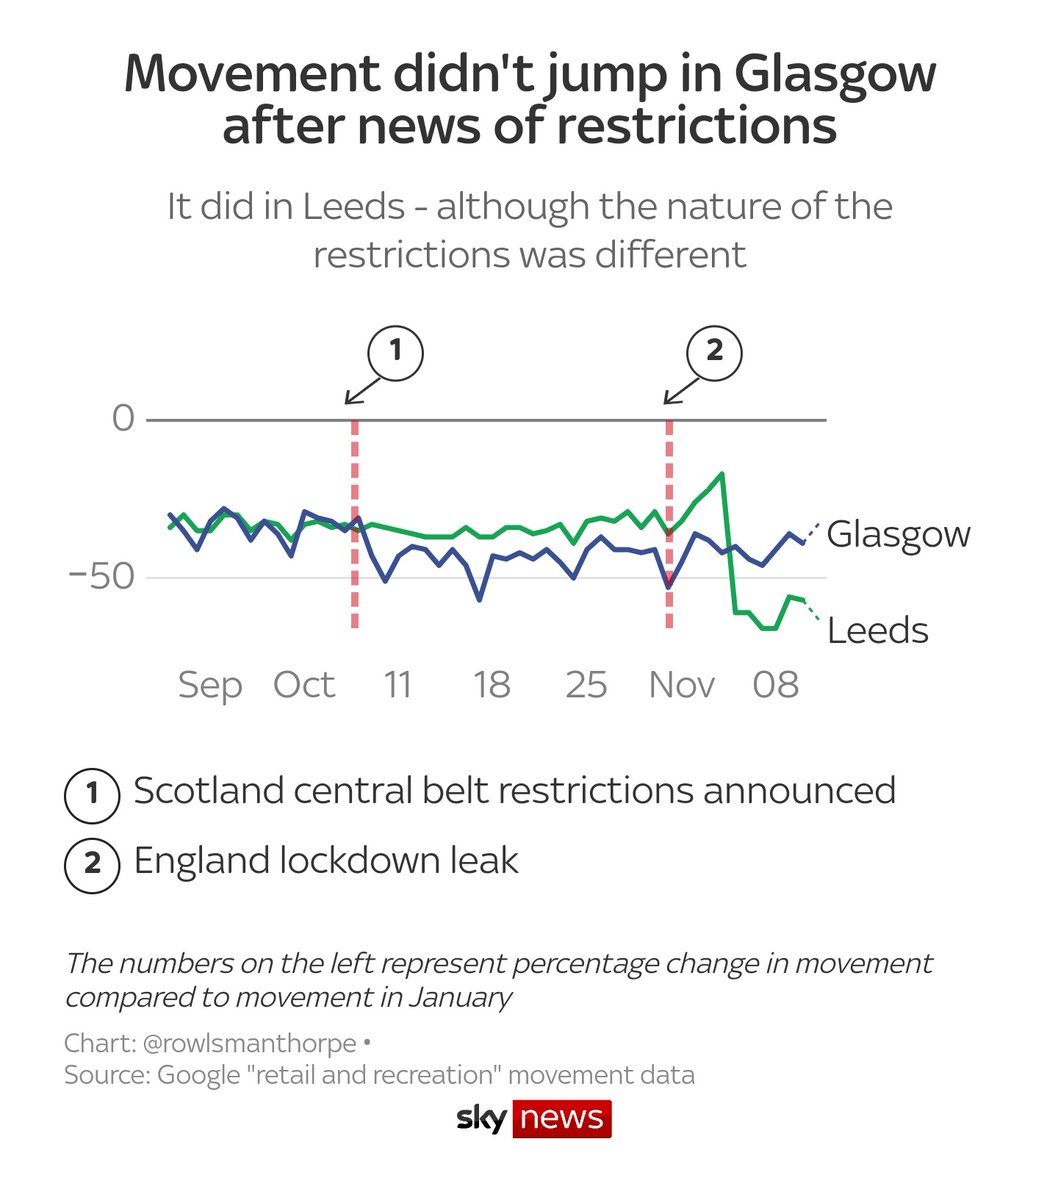 You might say, well, what did you expect? But there's no inevitability about any of thisThis chart shows movement in Glasgow after restrictions (albeit softer ones) were announced thereCompare the reaction - or lack of one - to a similar-sized city in England